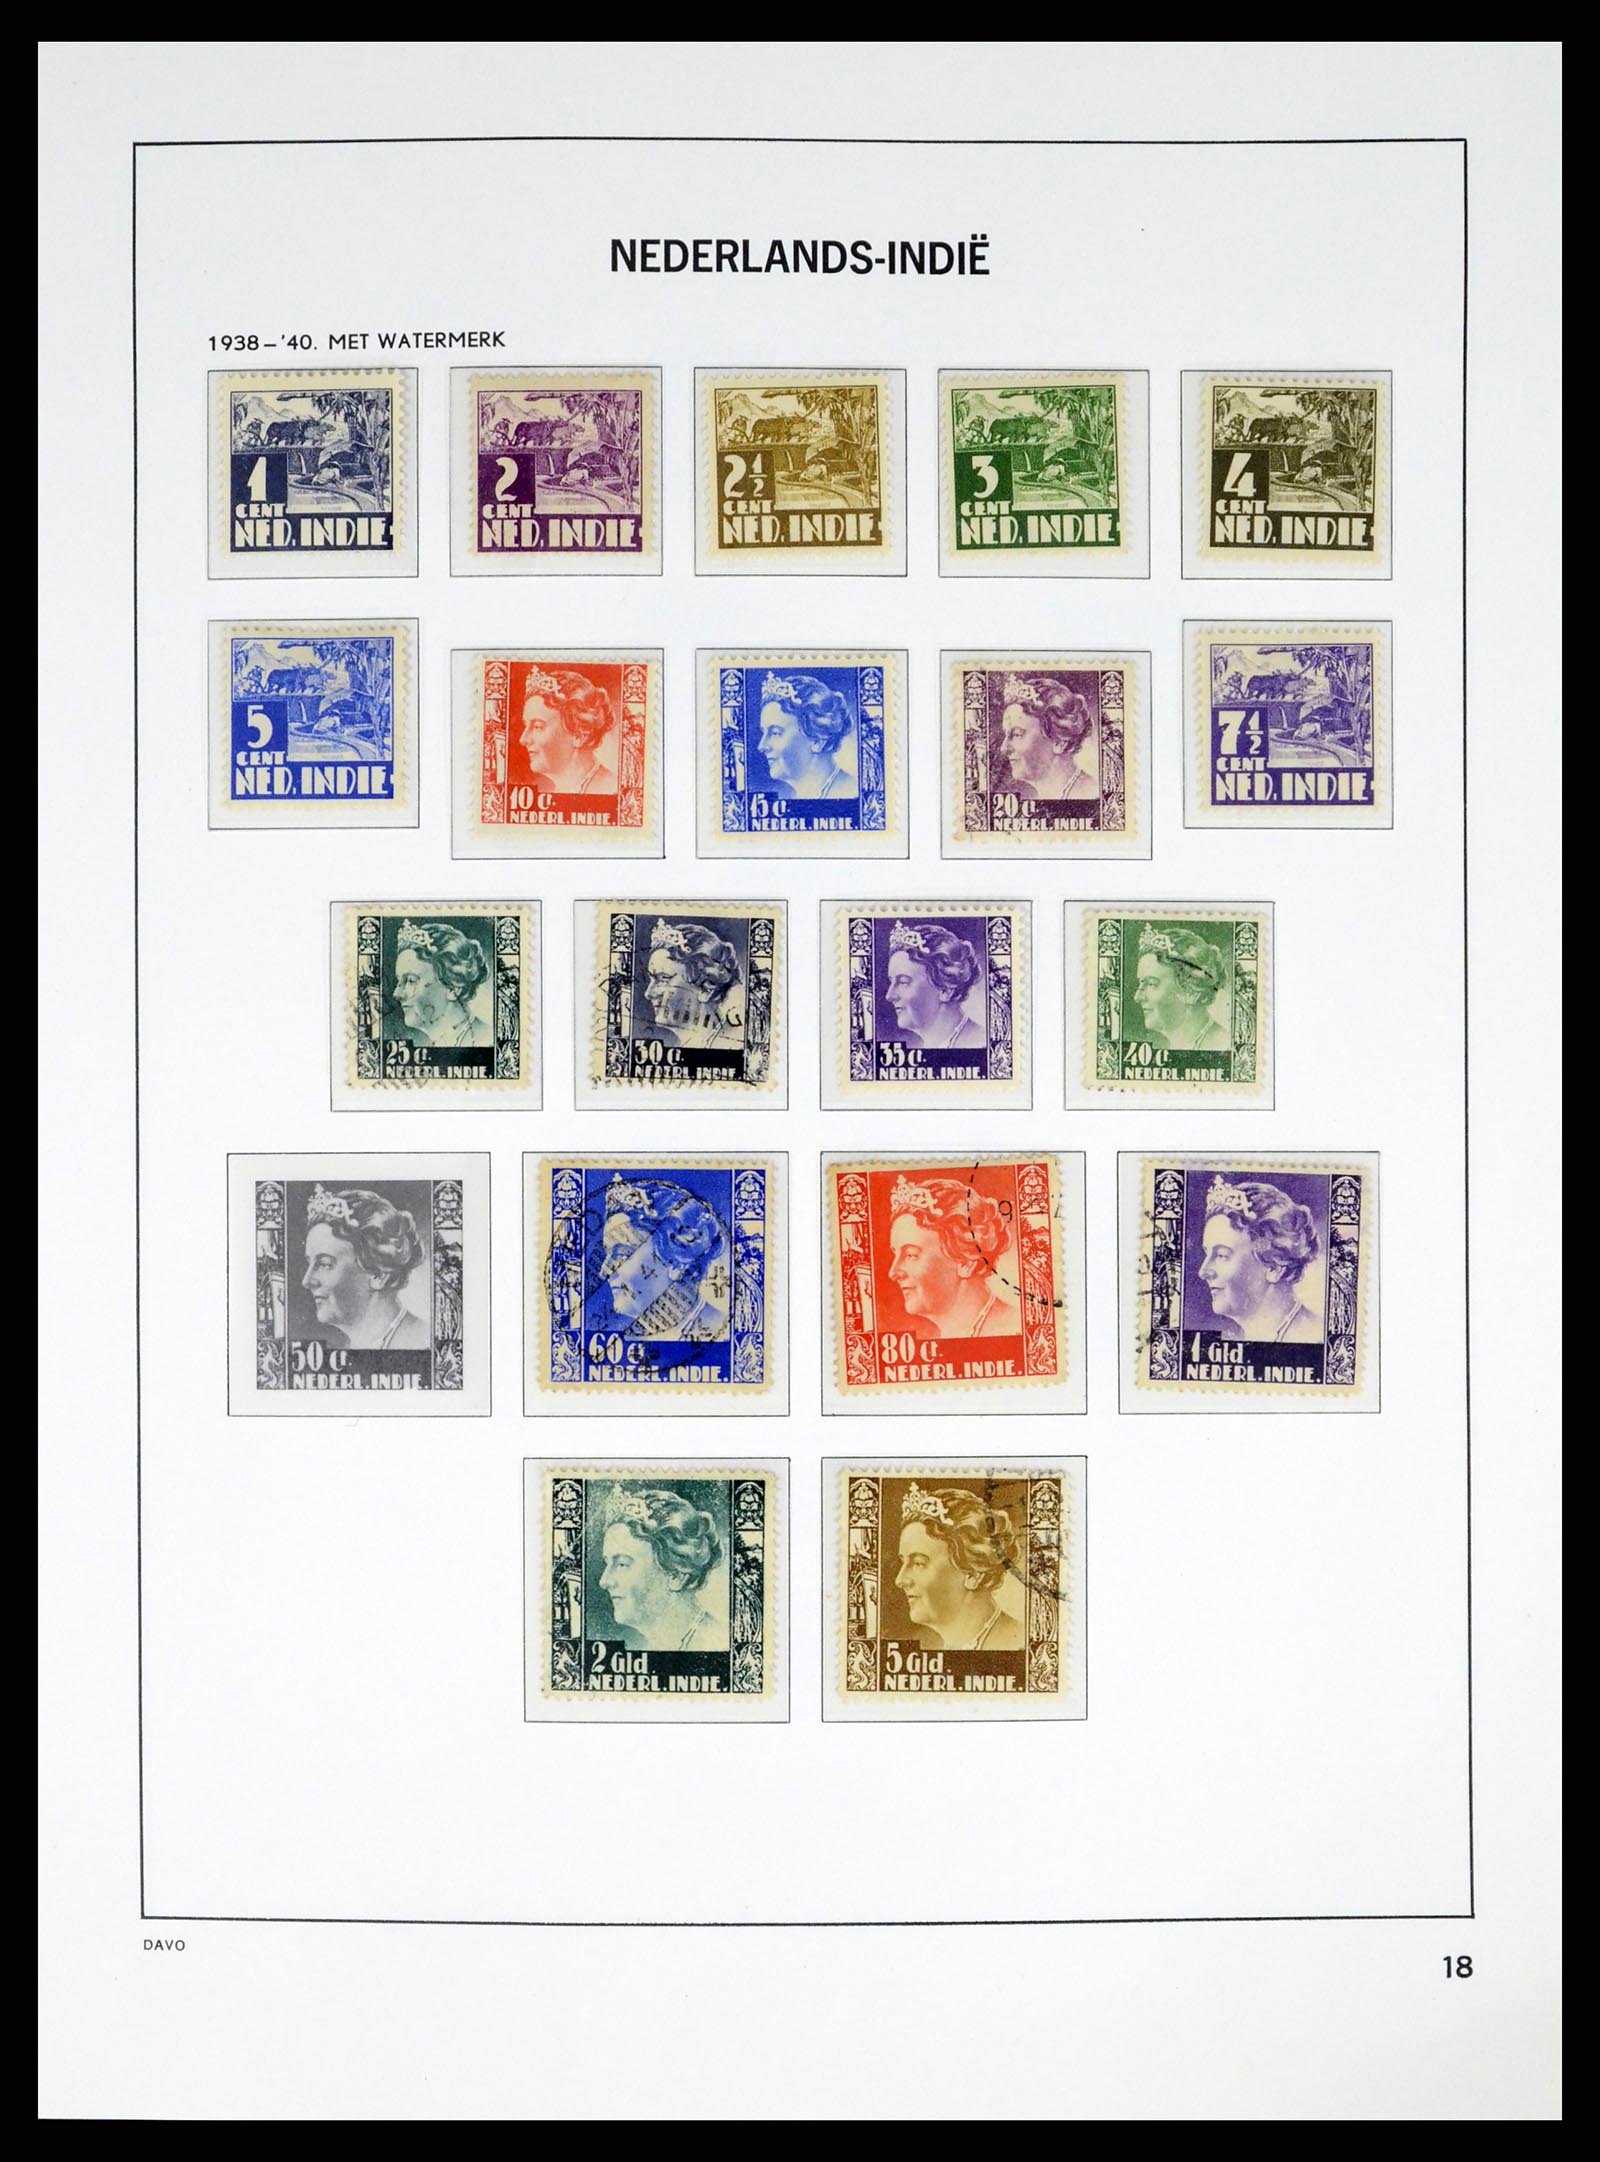 37332 018 - Stamp collection 37332 Dutch East Indies 1864-1949.